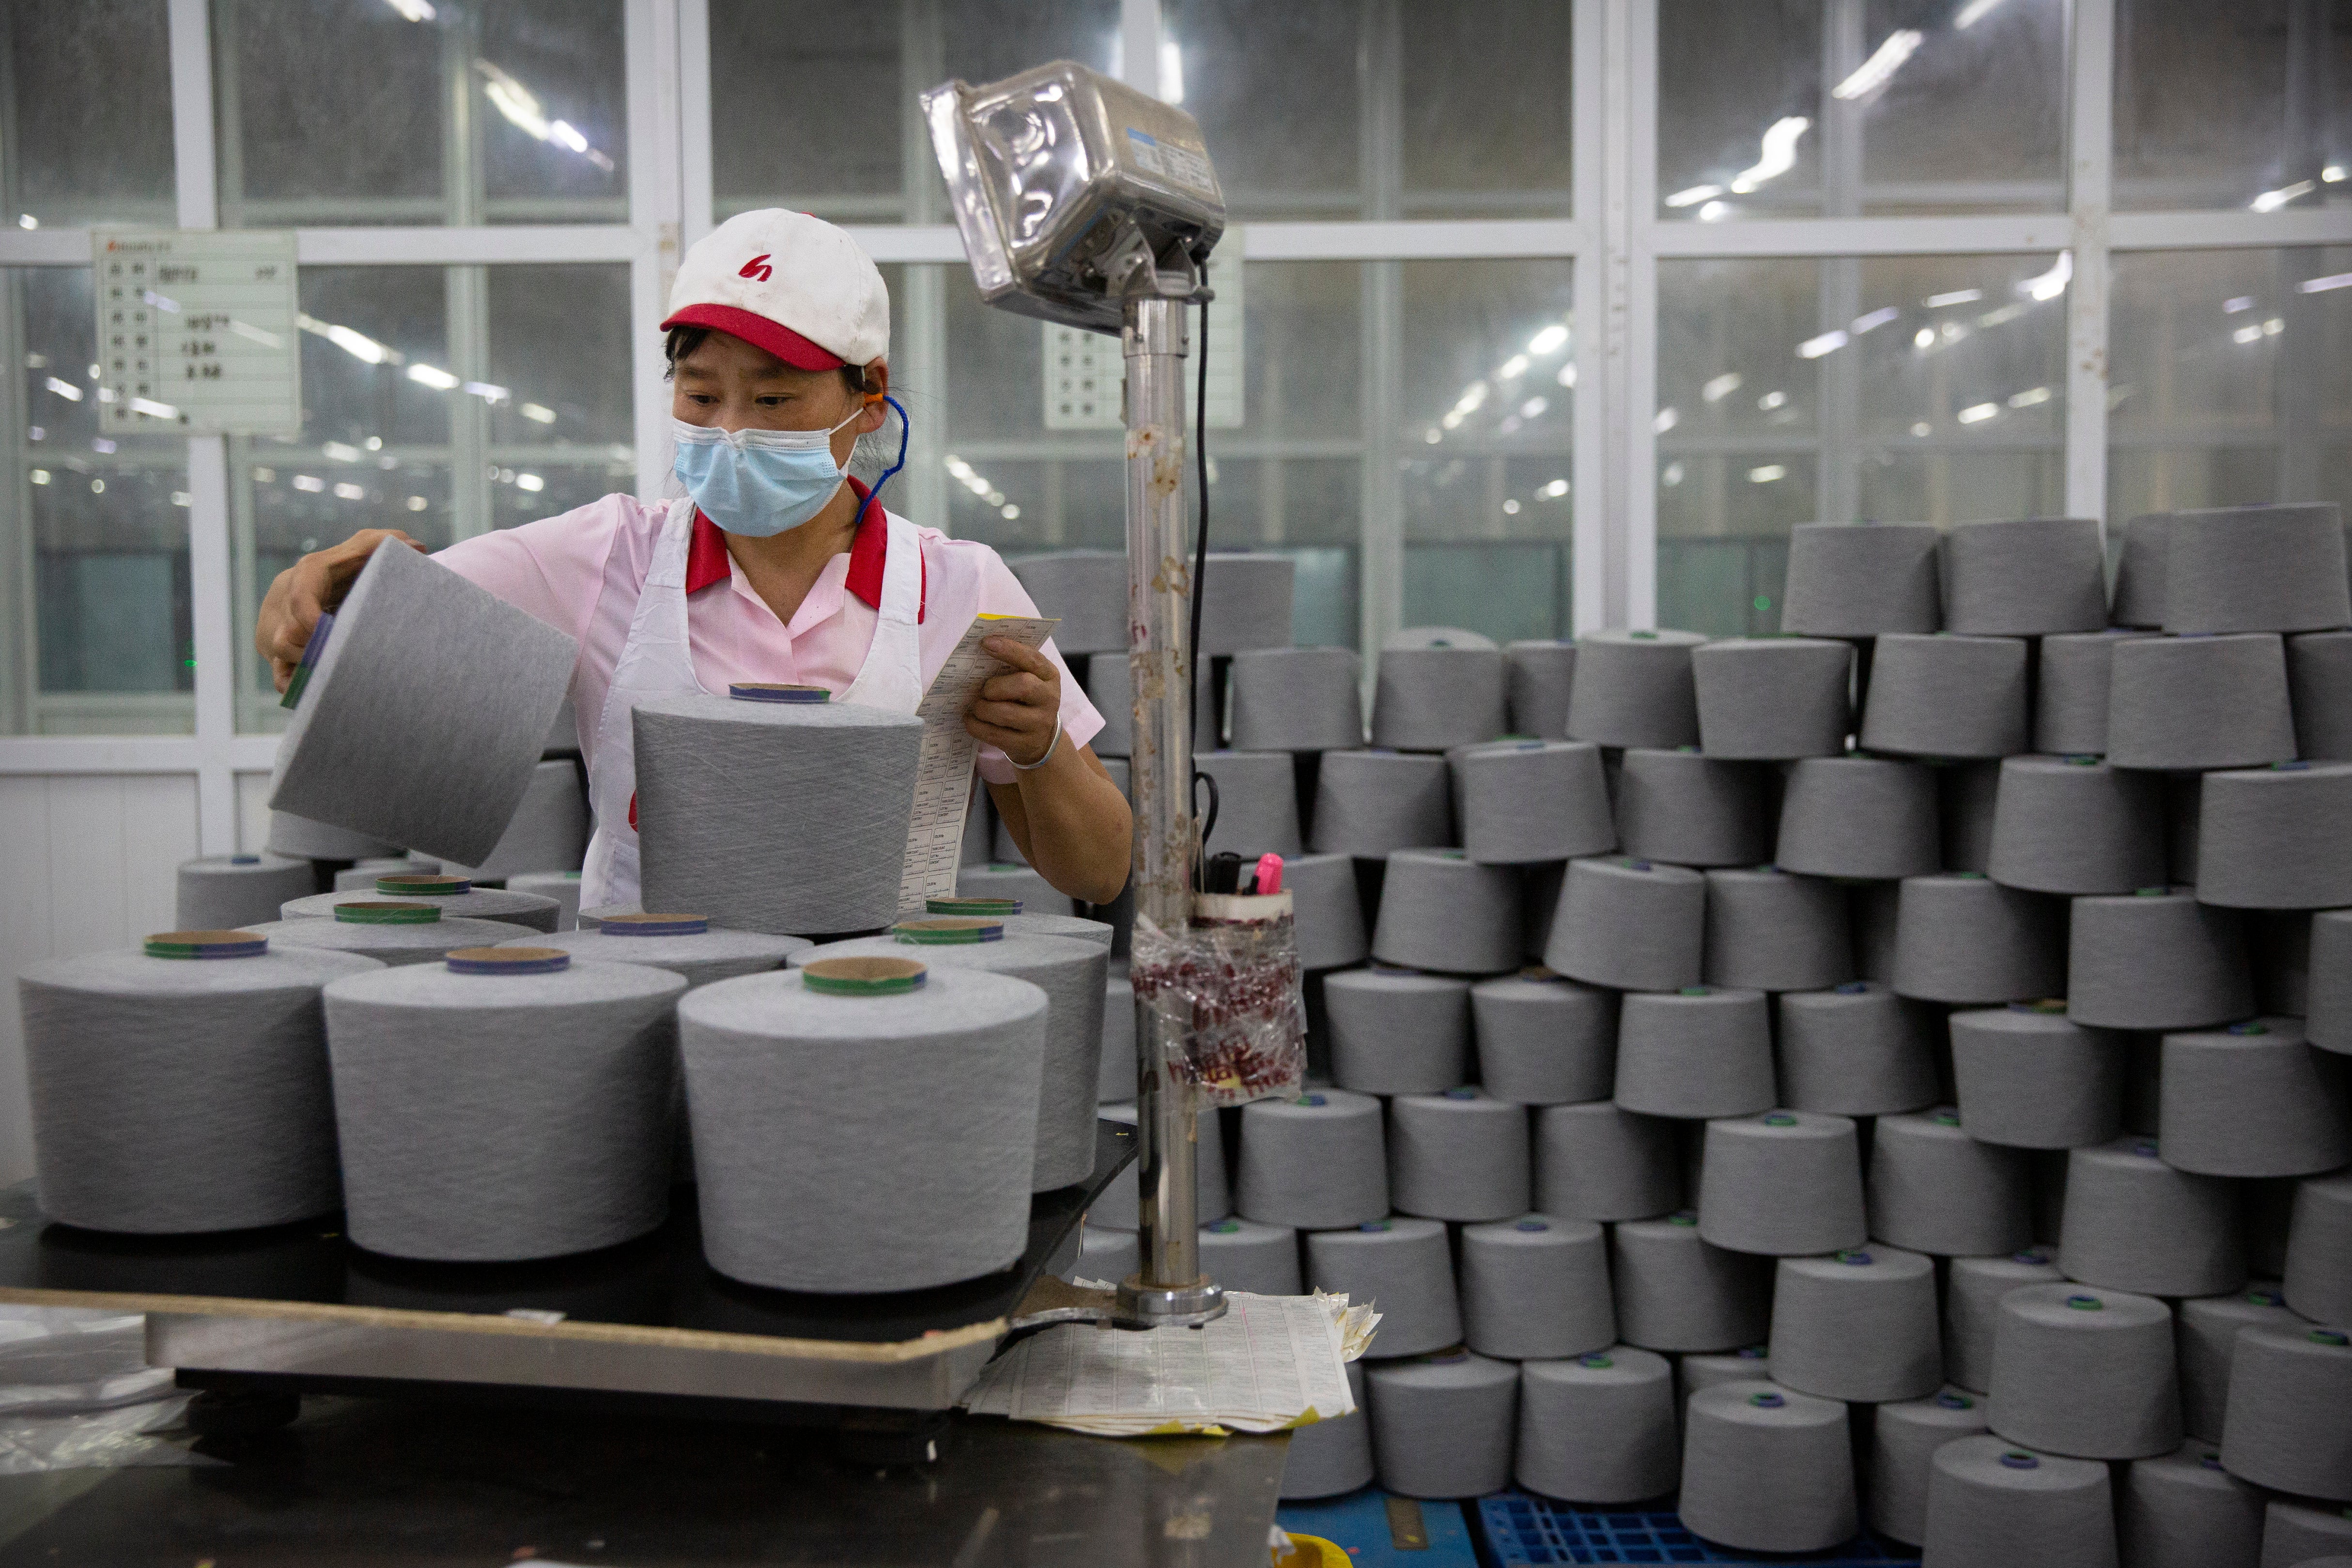 A worker packages spools of cotton yarn at a Huafu Fashion plant, as seen during a government-organised trip for foreign journalists, in Aksu in western China's Xinjiang Uyghur